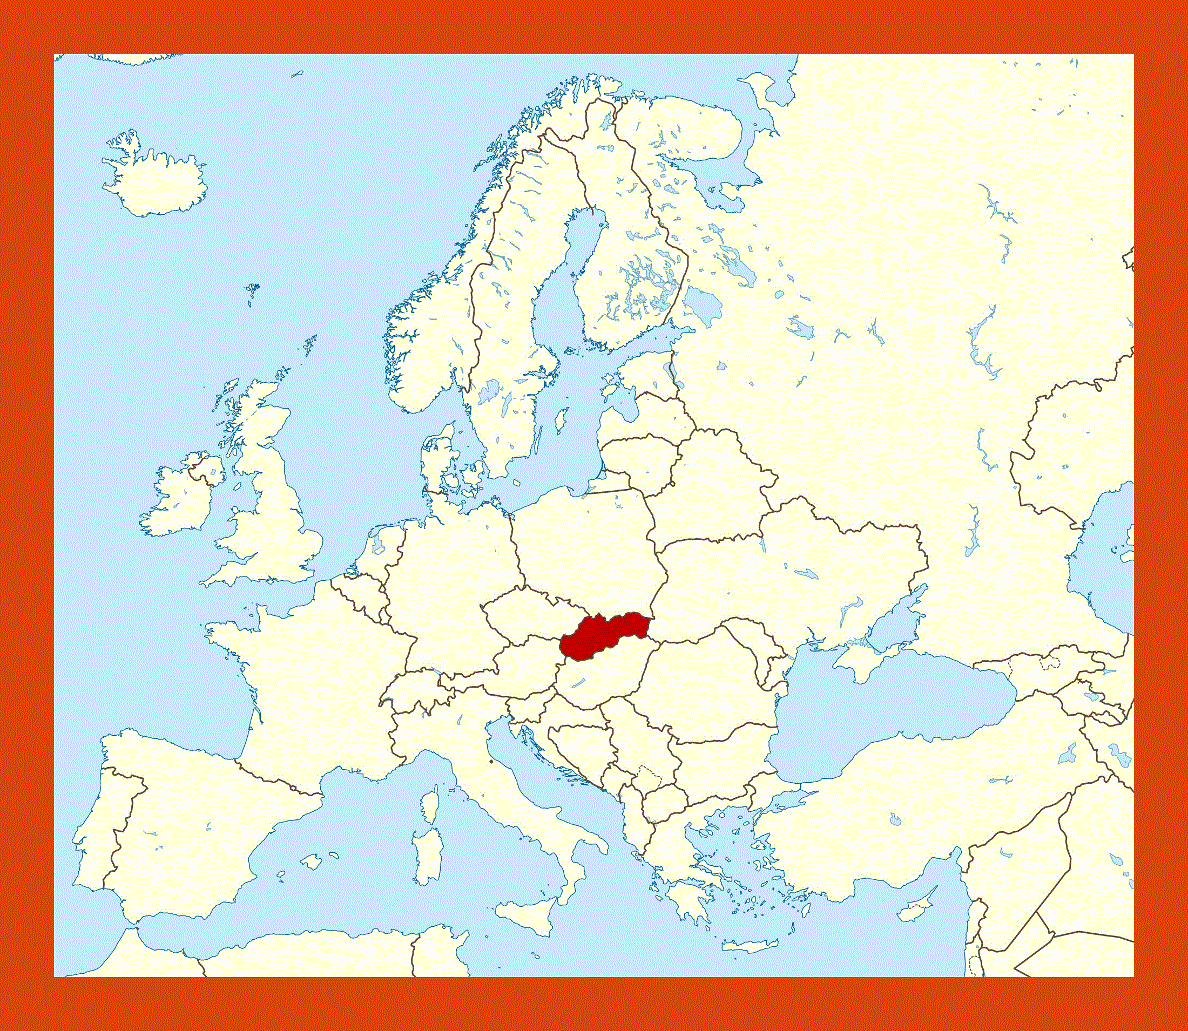 Location map of Slovakia in Europe